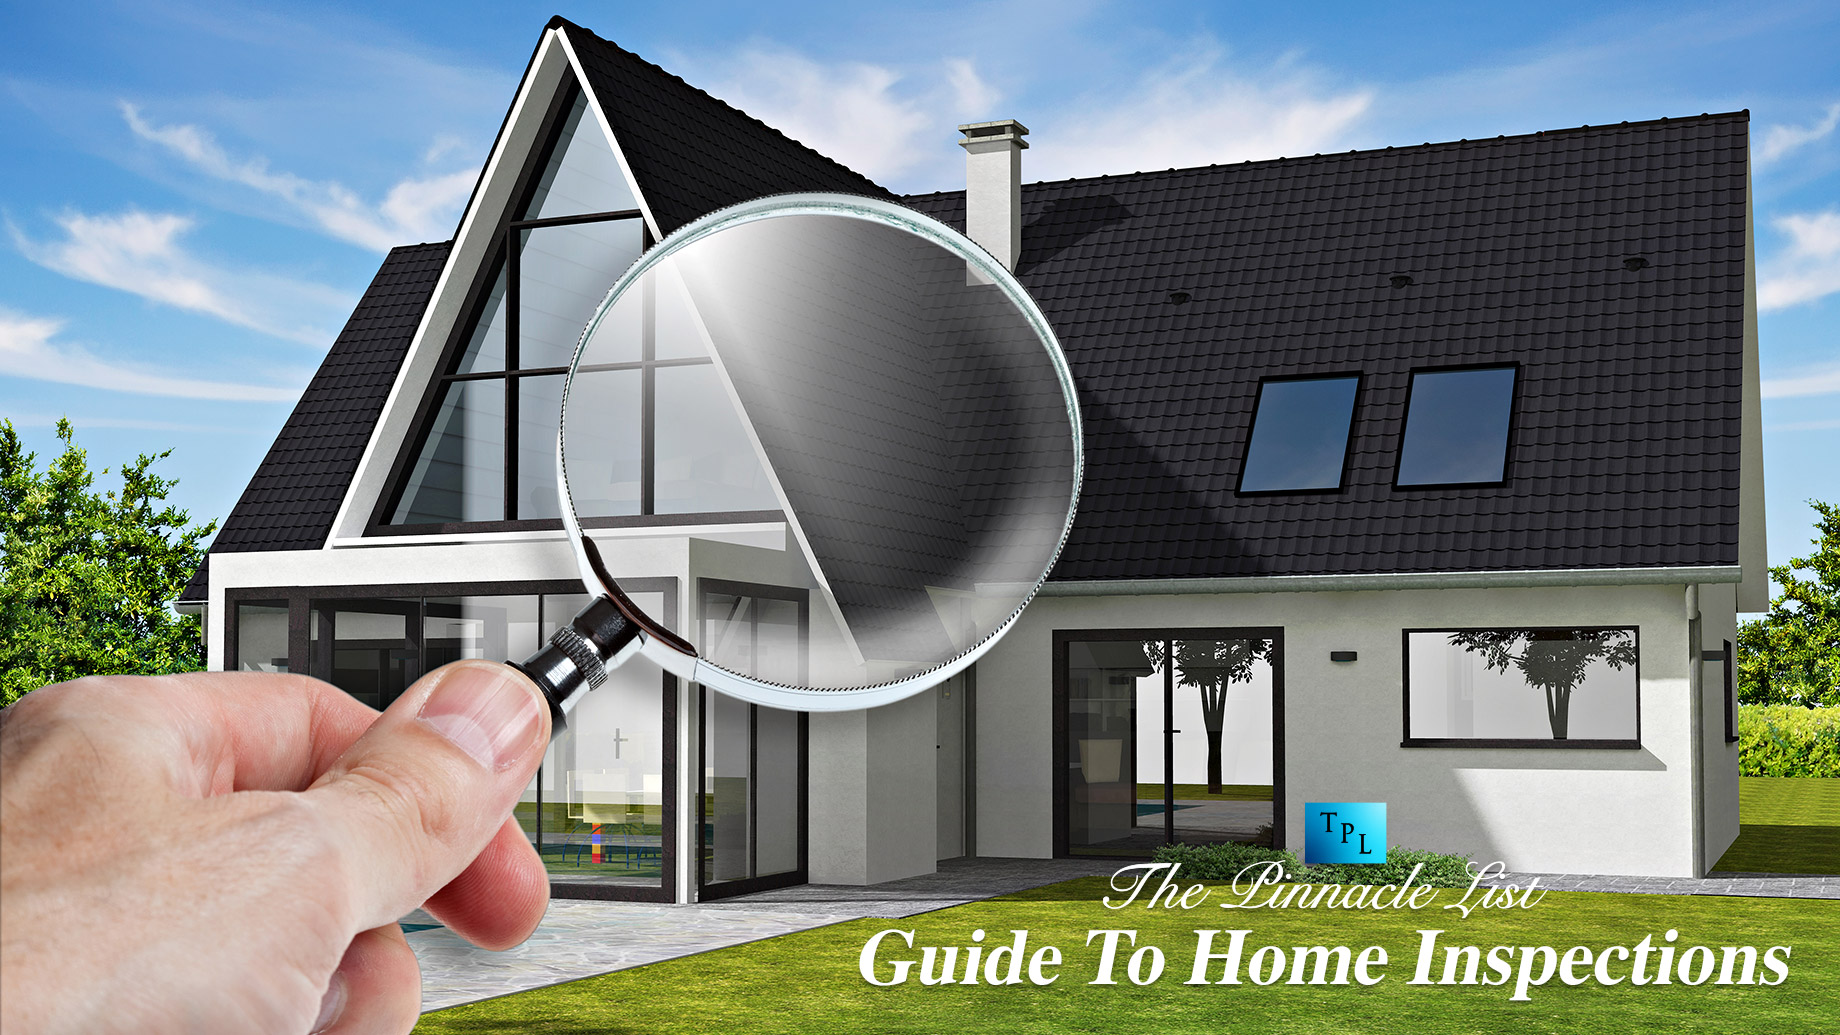 Guide To Home Inspections